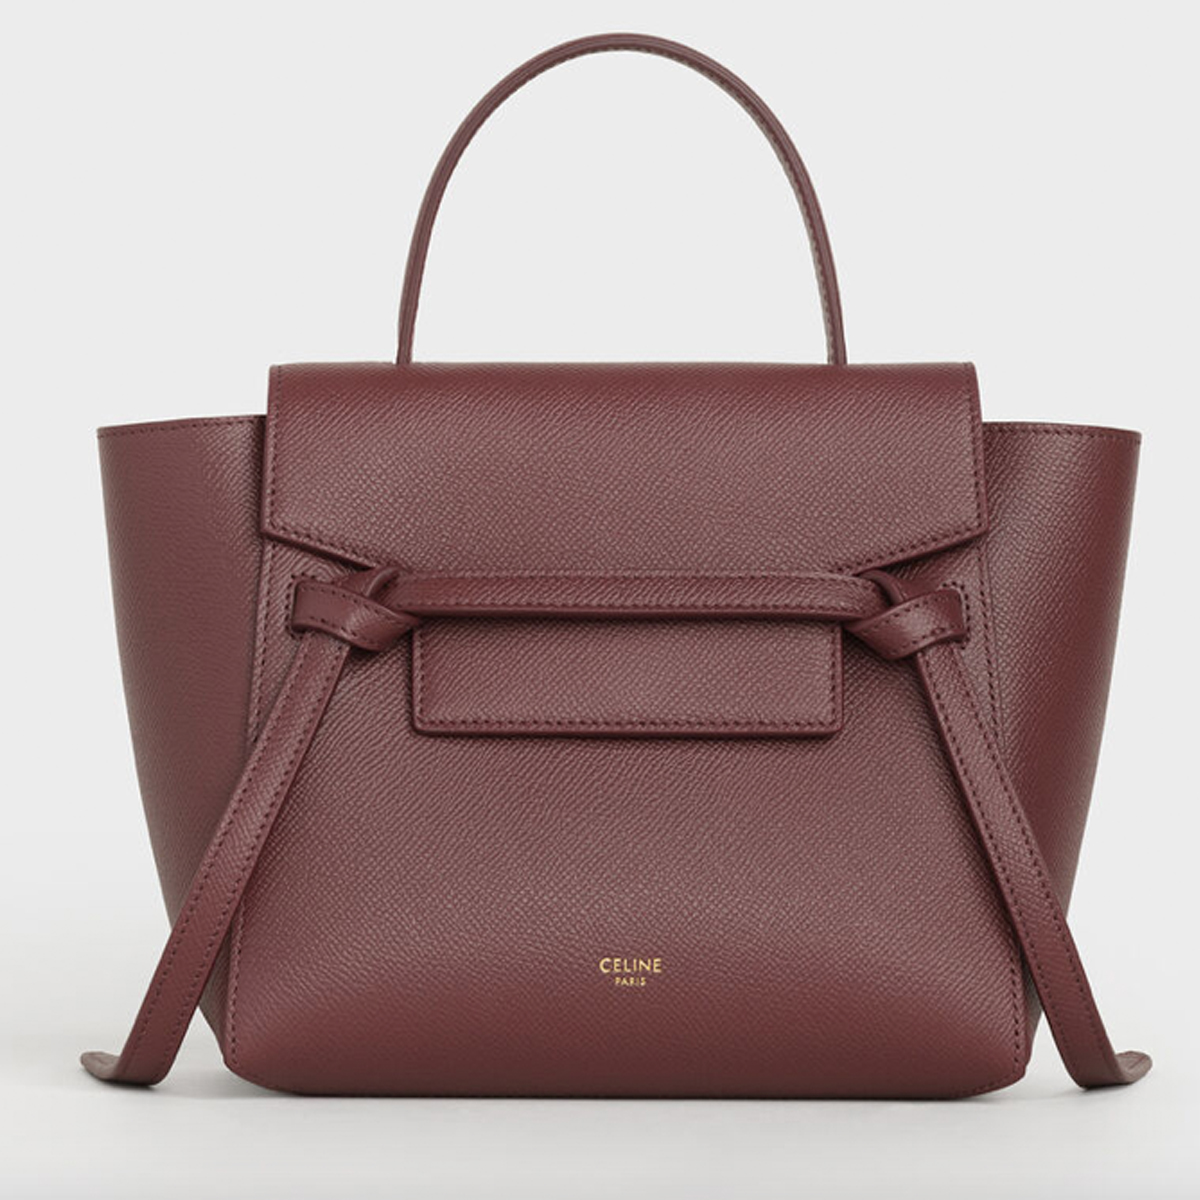 The Best Celine Bags to Invest Your Money Into